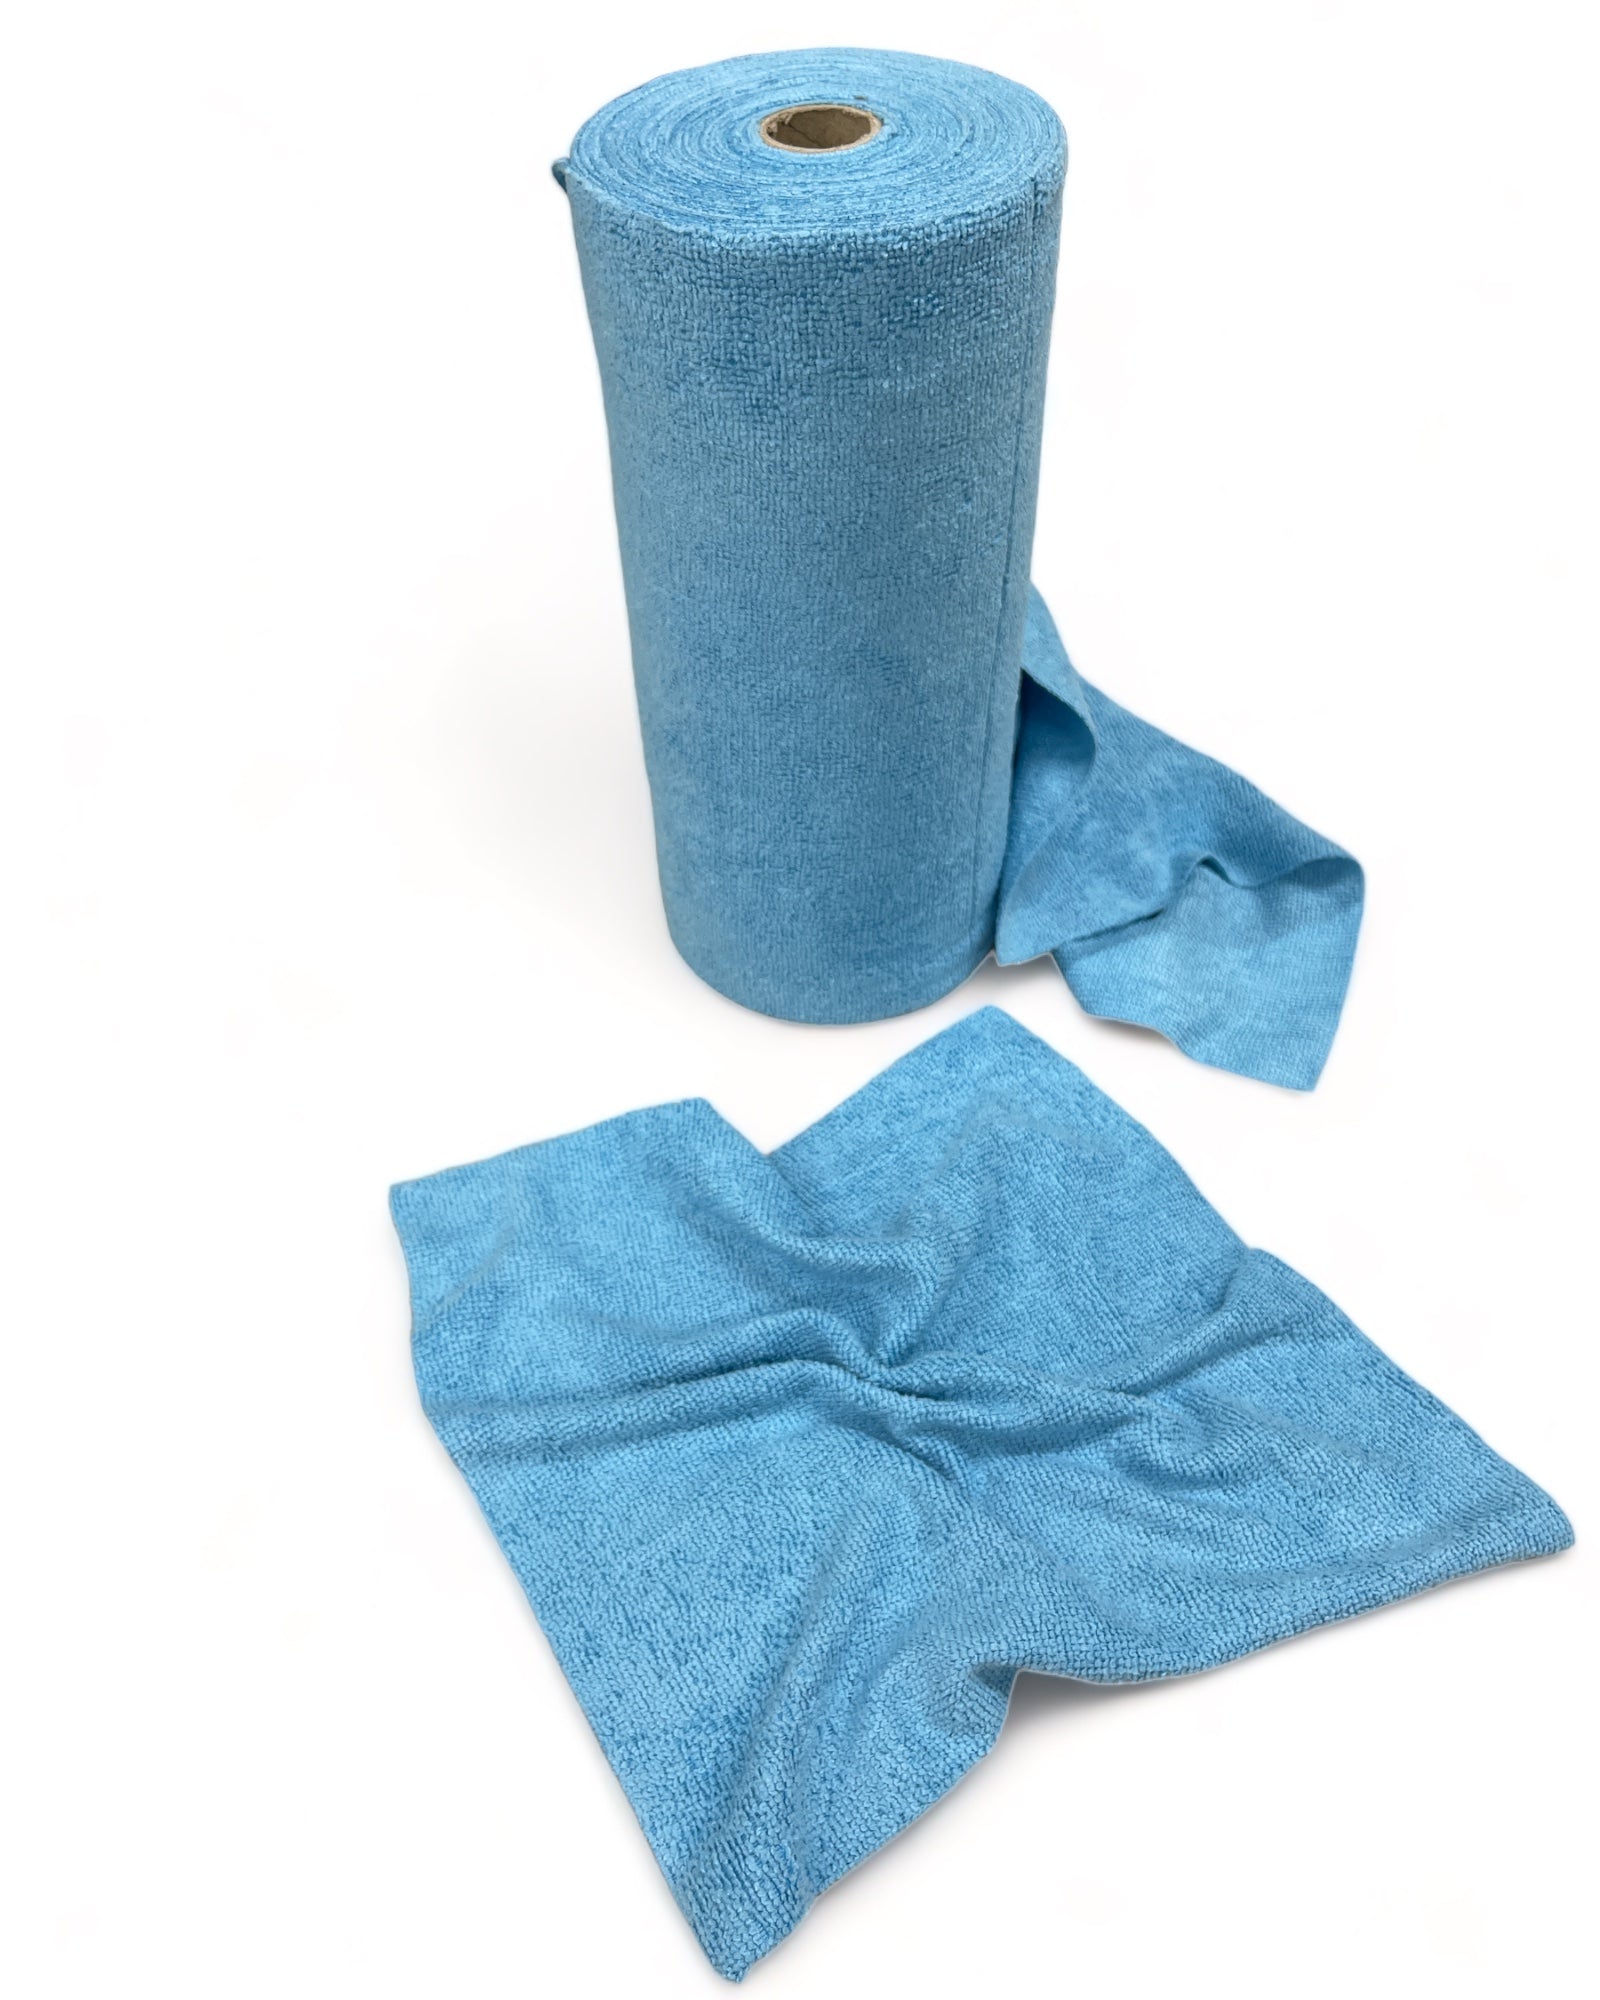 Blue microfiber towels tightly rolled up